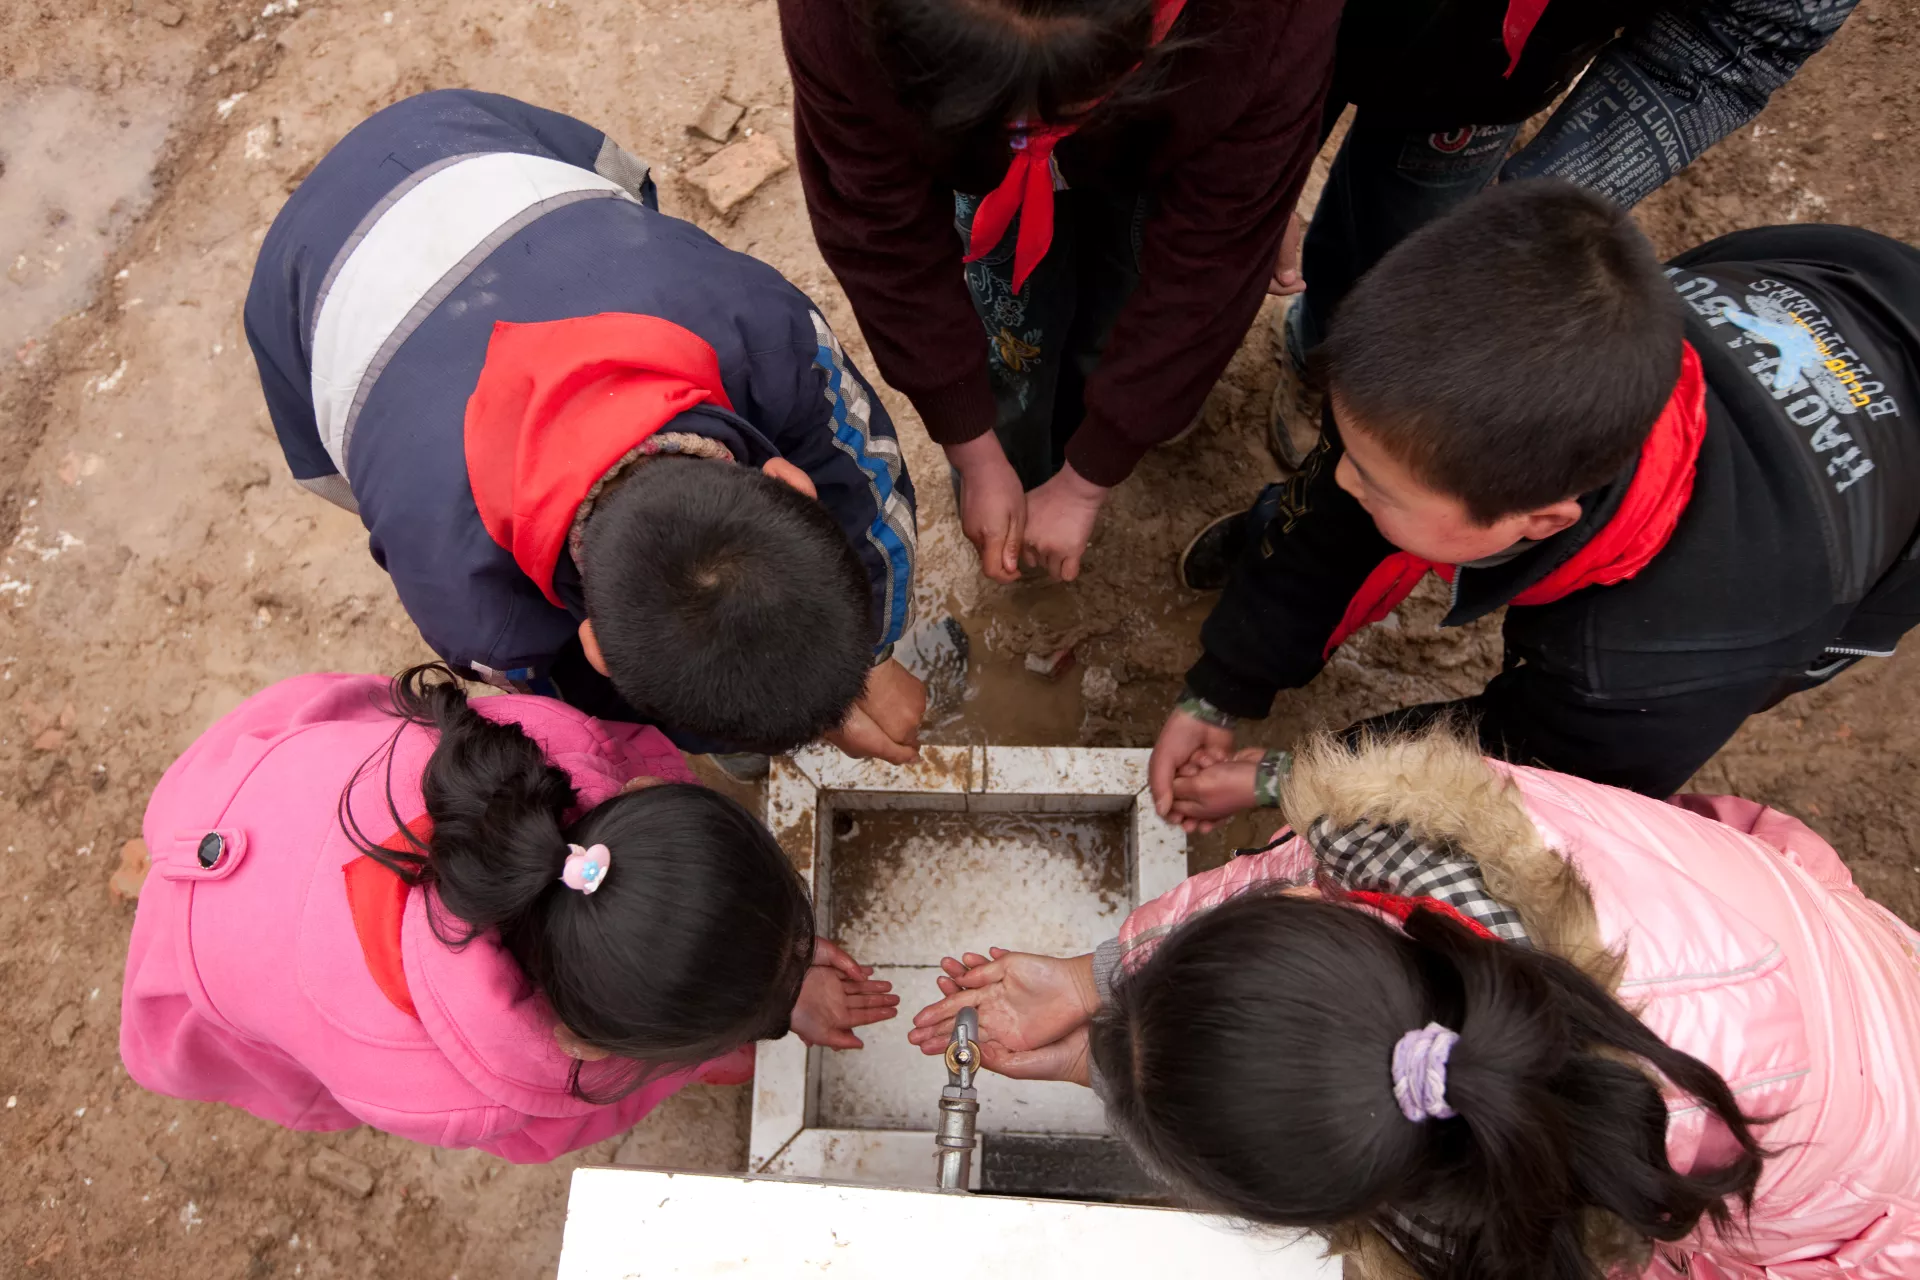 Boys and girls wash their hands during recess at Caochuan Primary School, Xihe County, Gansu Province, China.